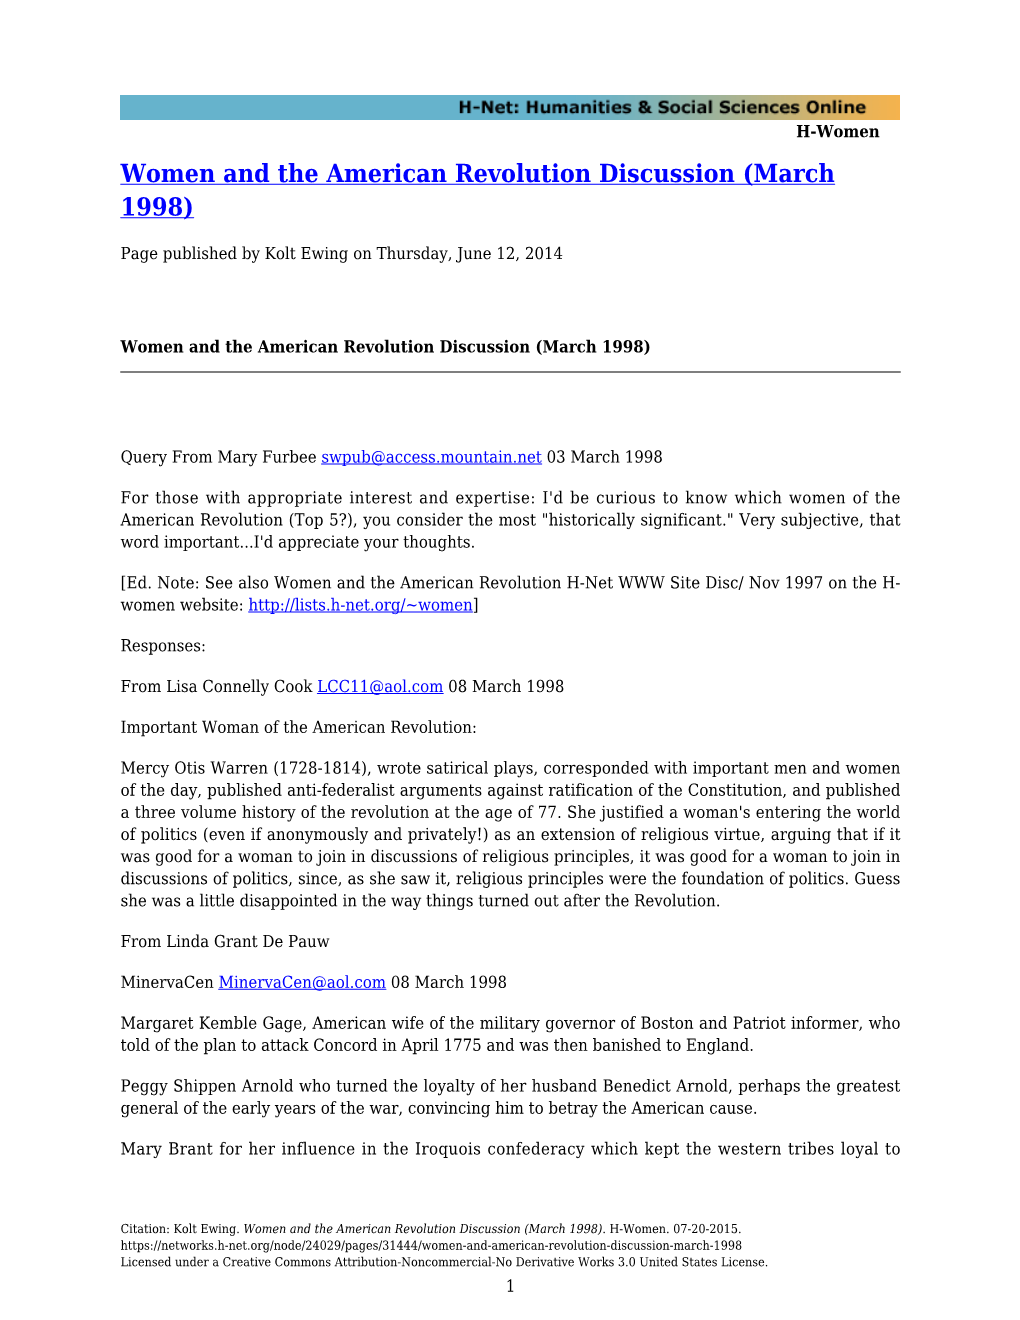 Women and the American Revolution Discussion (March 1998)